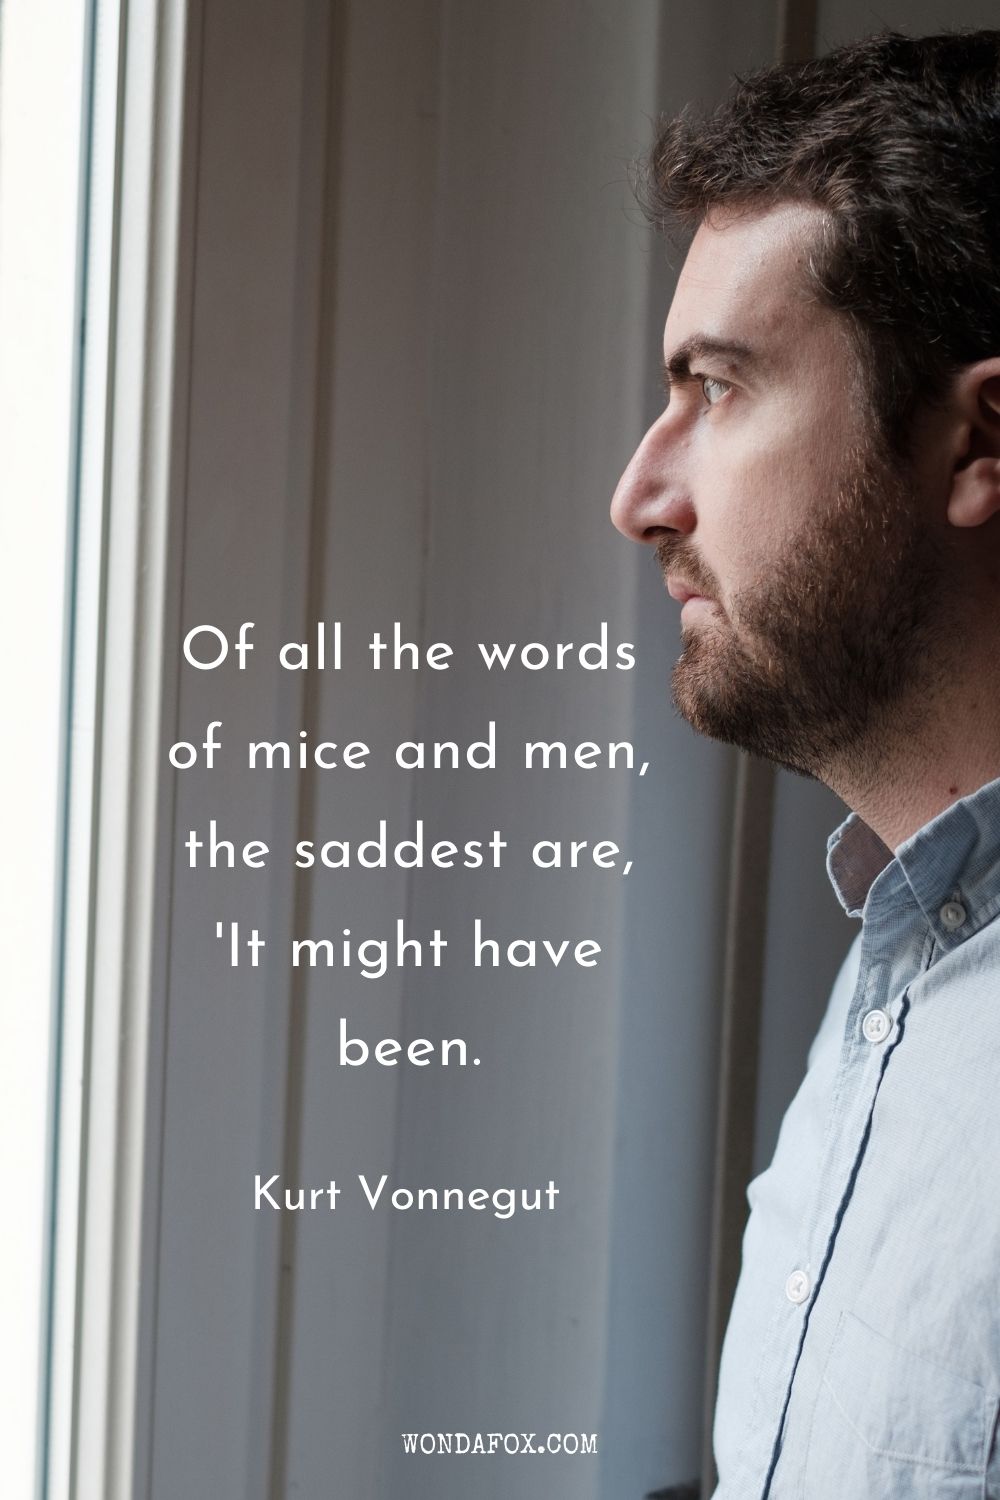 Of all the words of mice and men, the saddest are, 'It might have been.